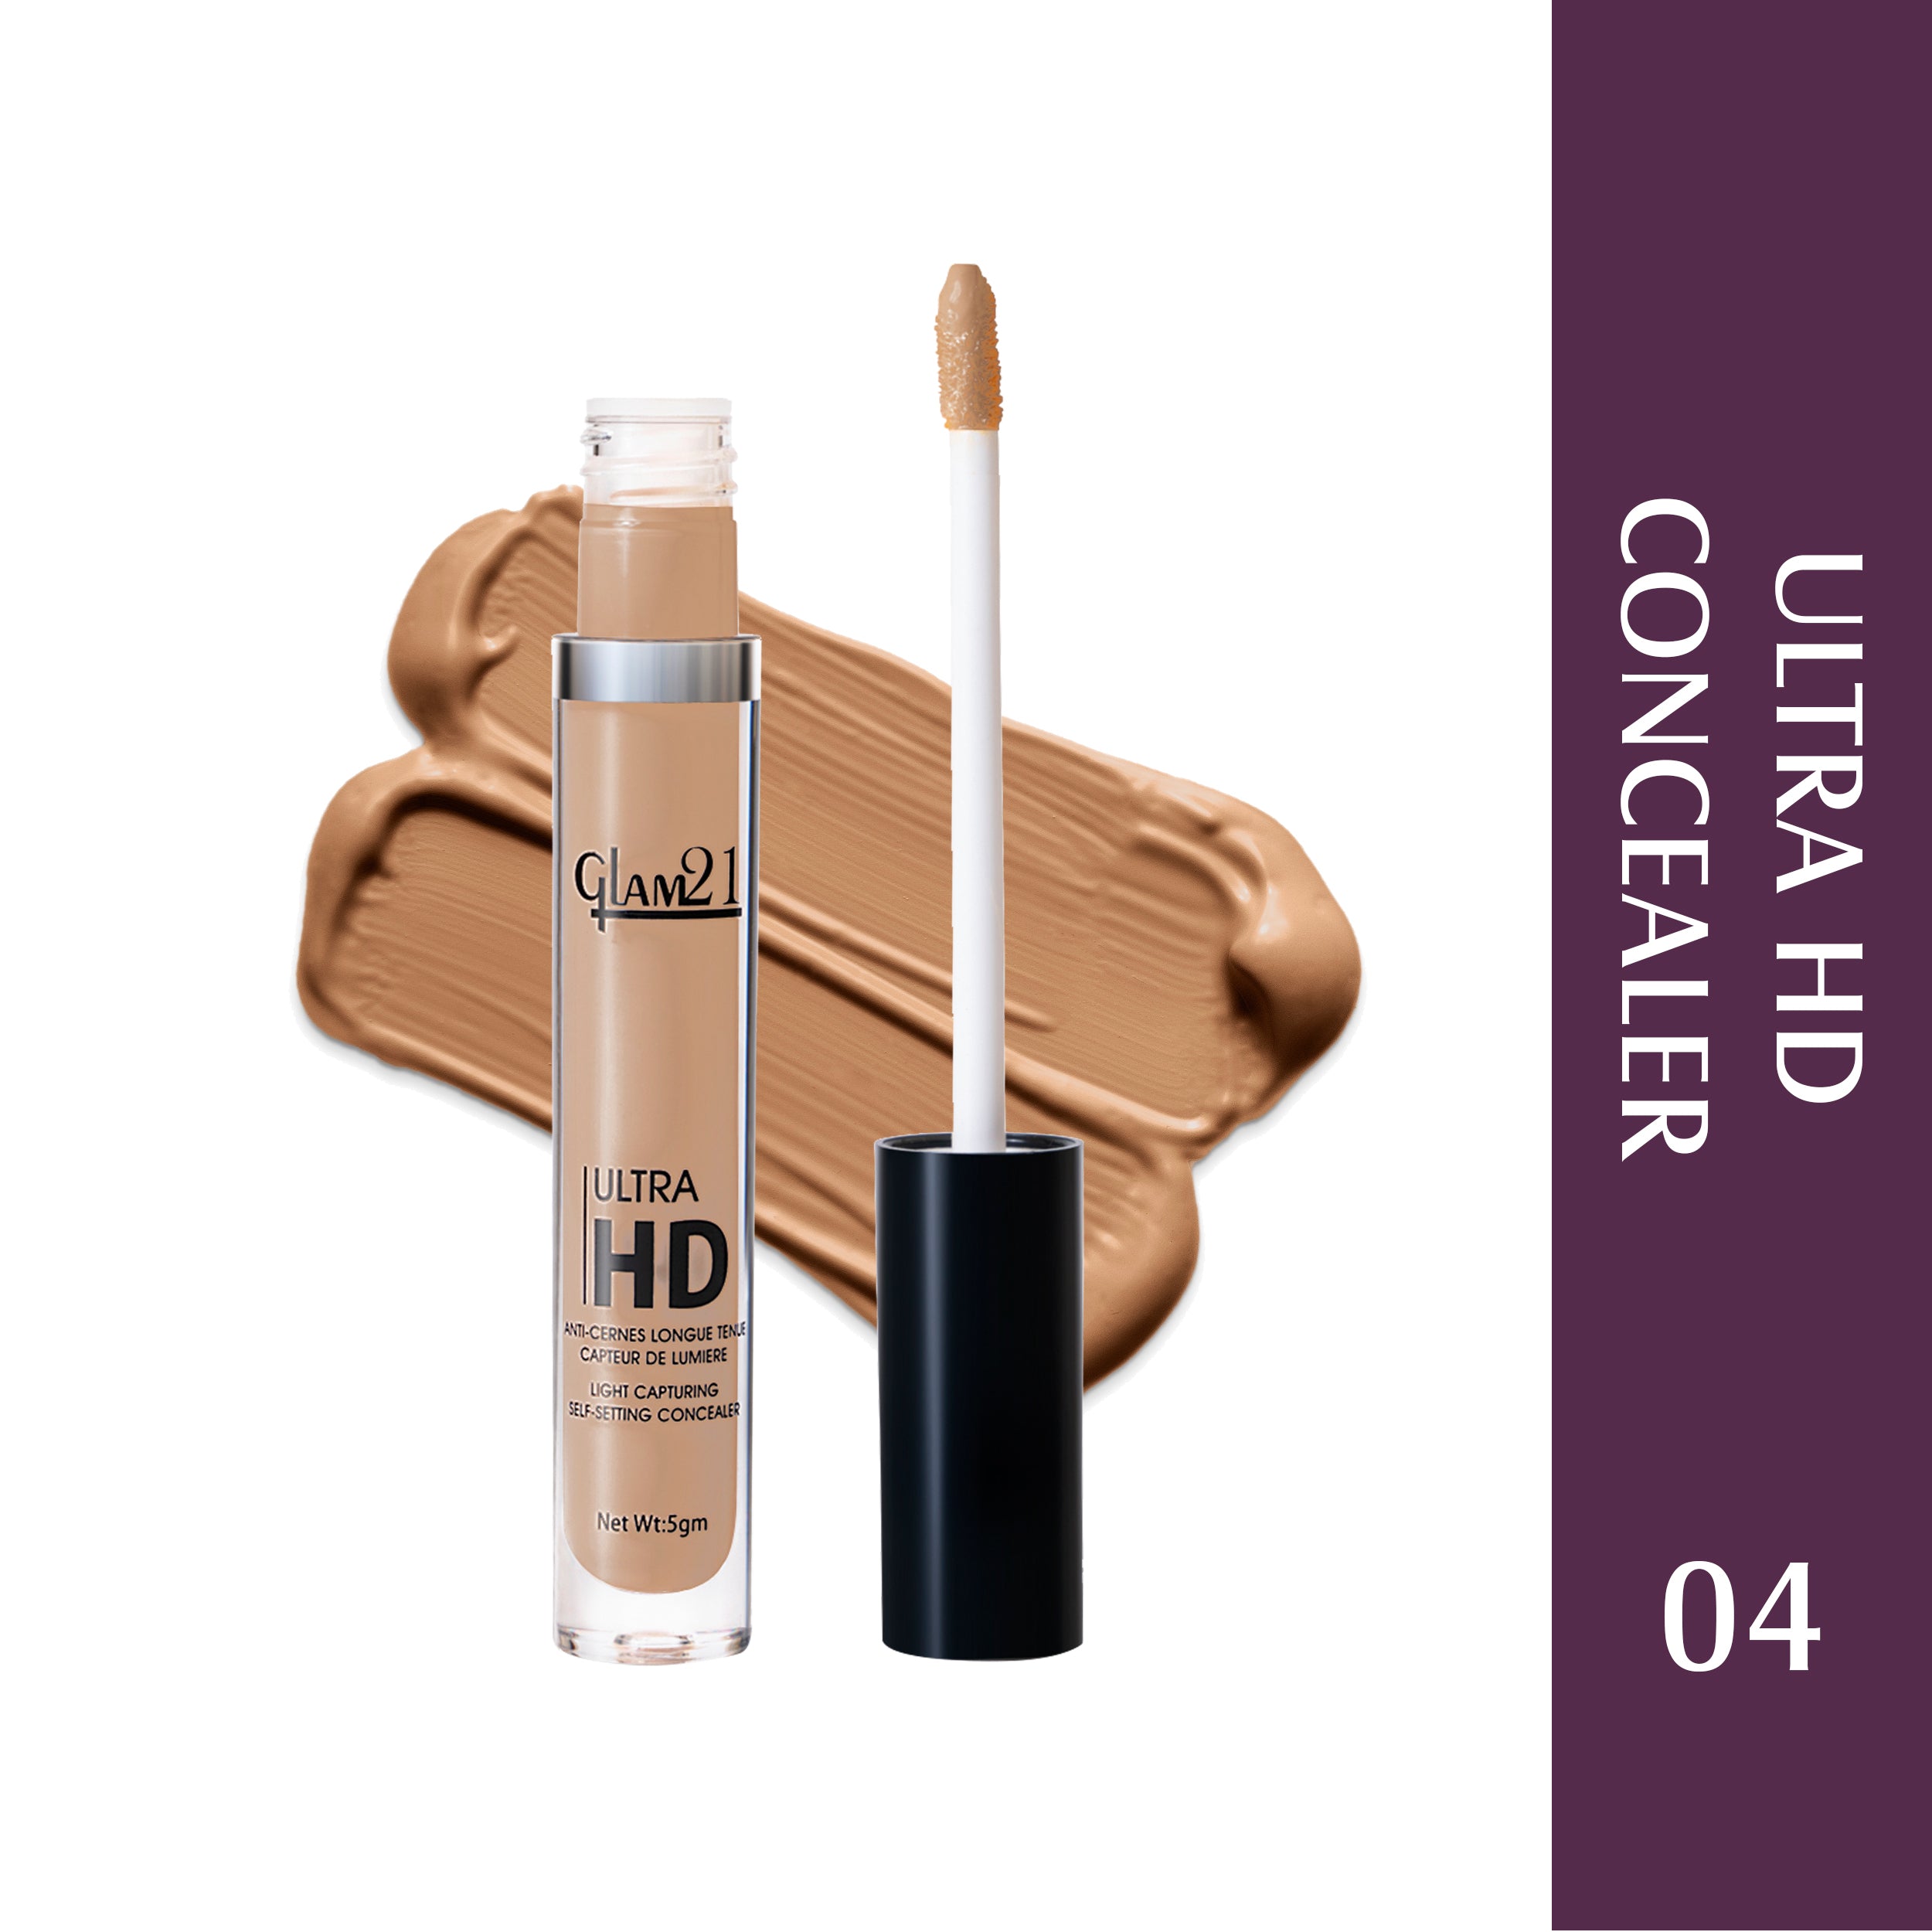 Glam21 Ultra HD Liquid Concealer for HD Finish | Non-sticky & Long Lasting Matte Finish Concealer (Sand, 5 g)